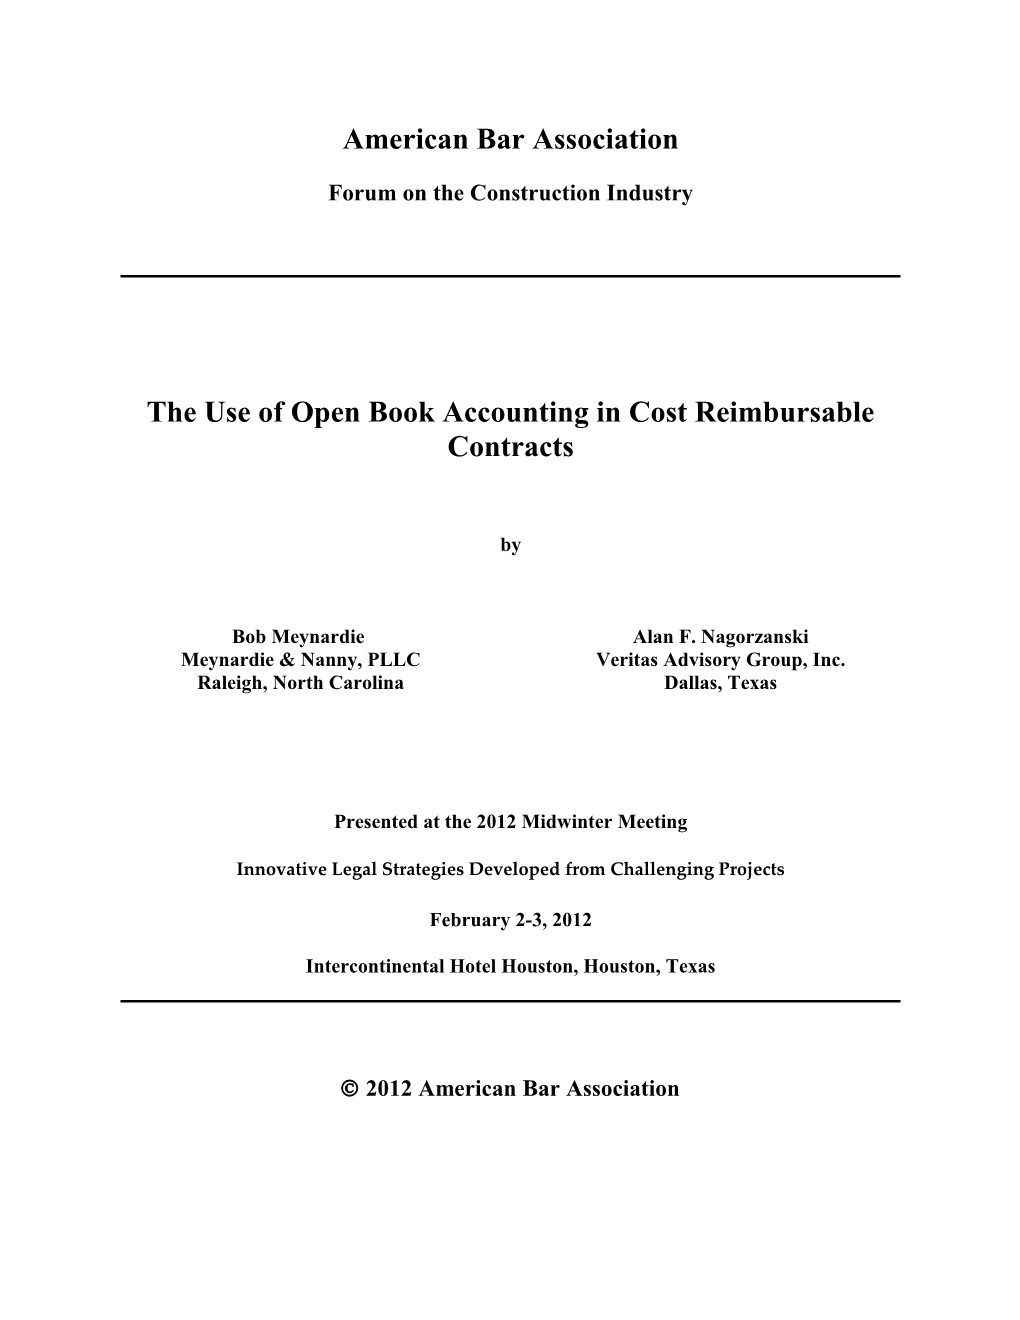 The Use of Open Book Accounting in Cost Reimbursable Contracts